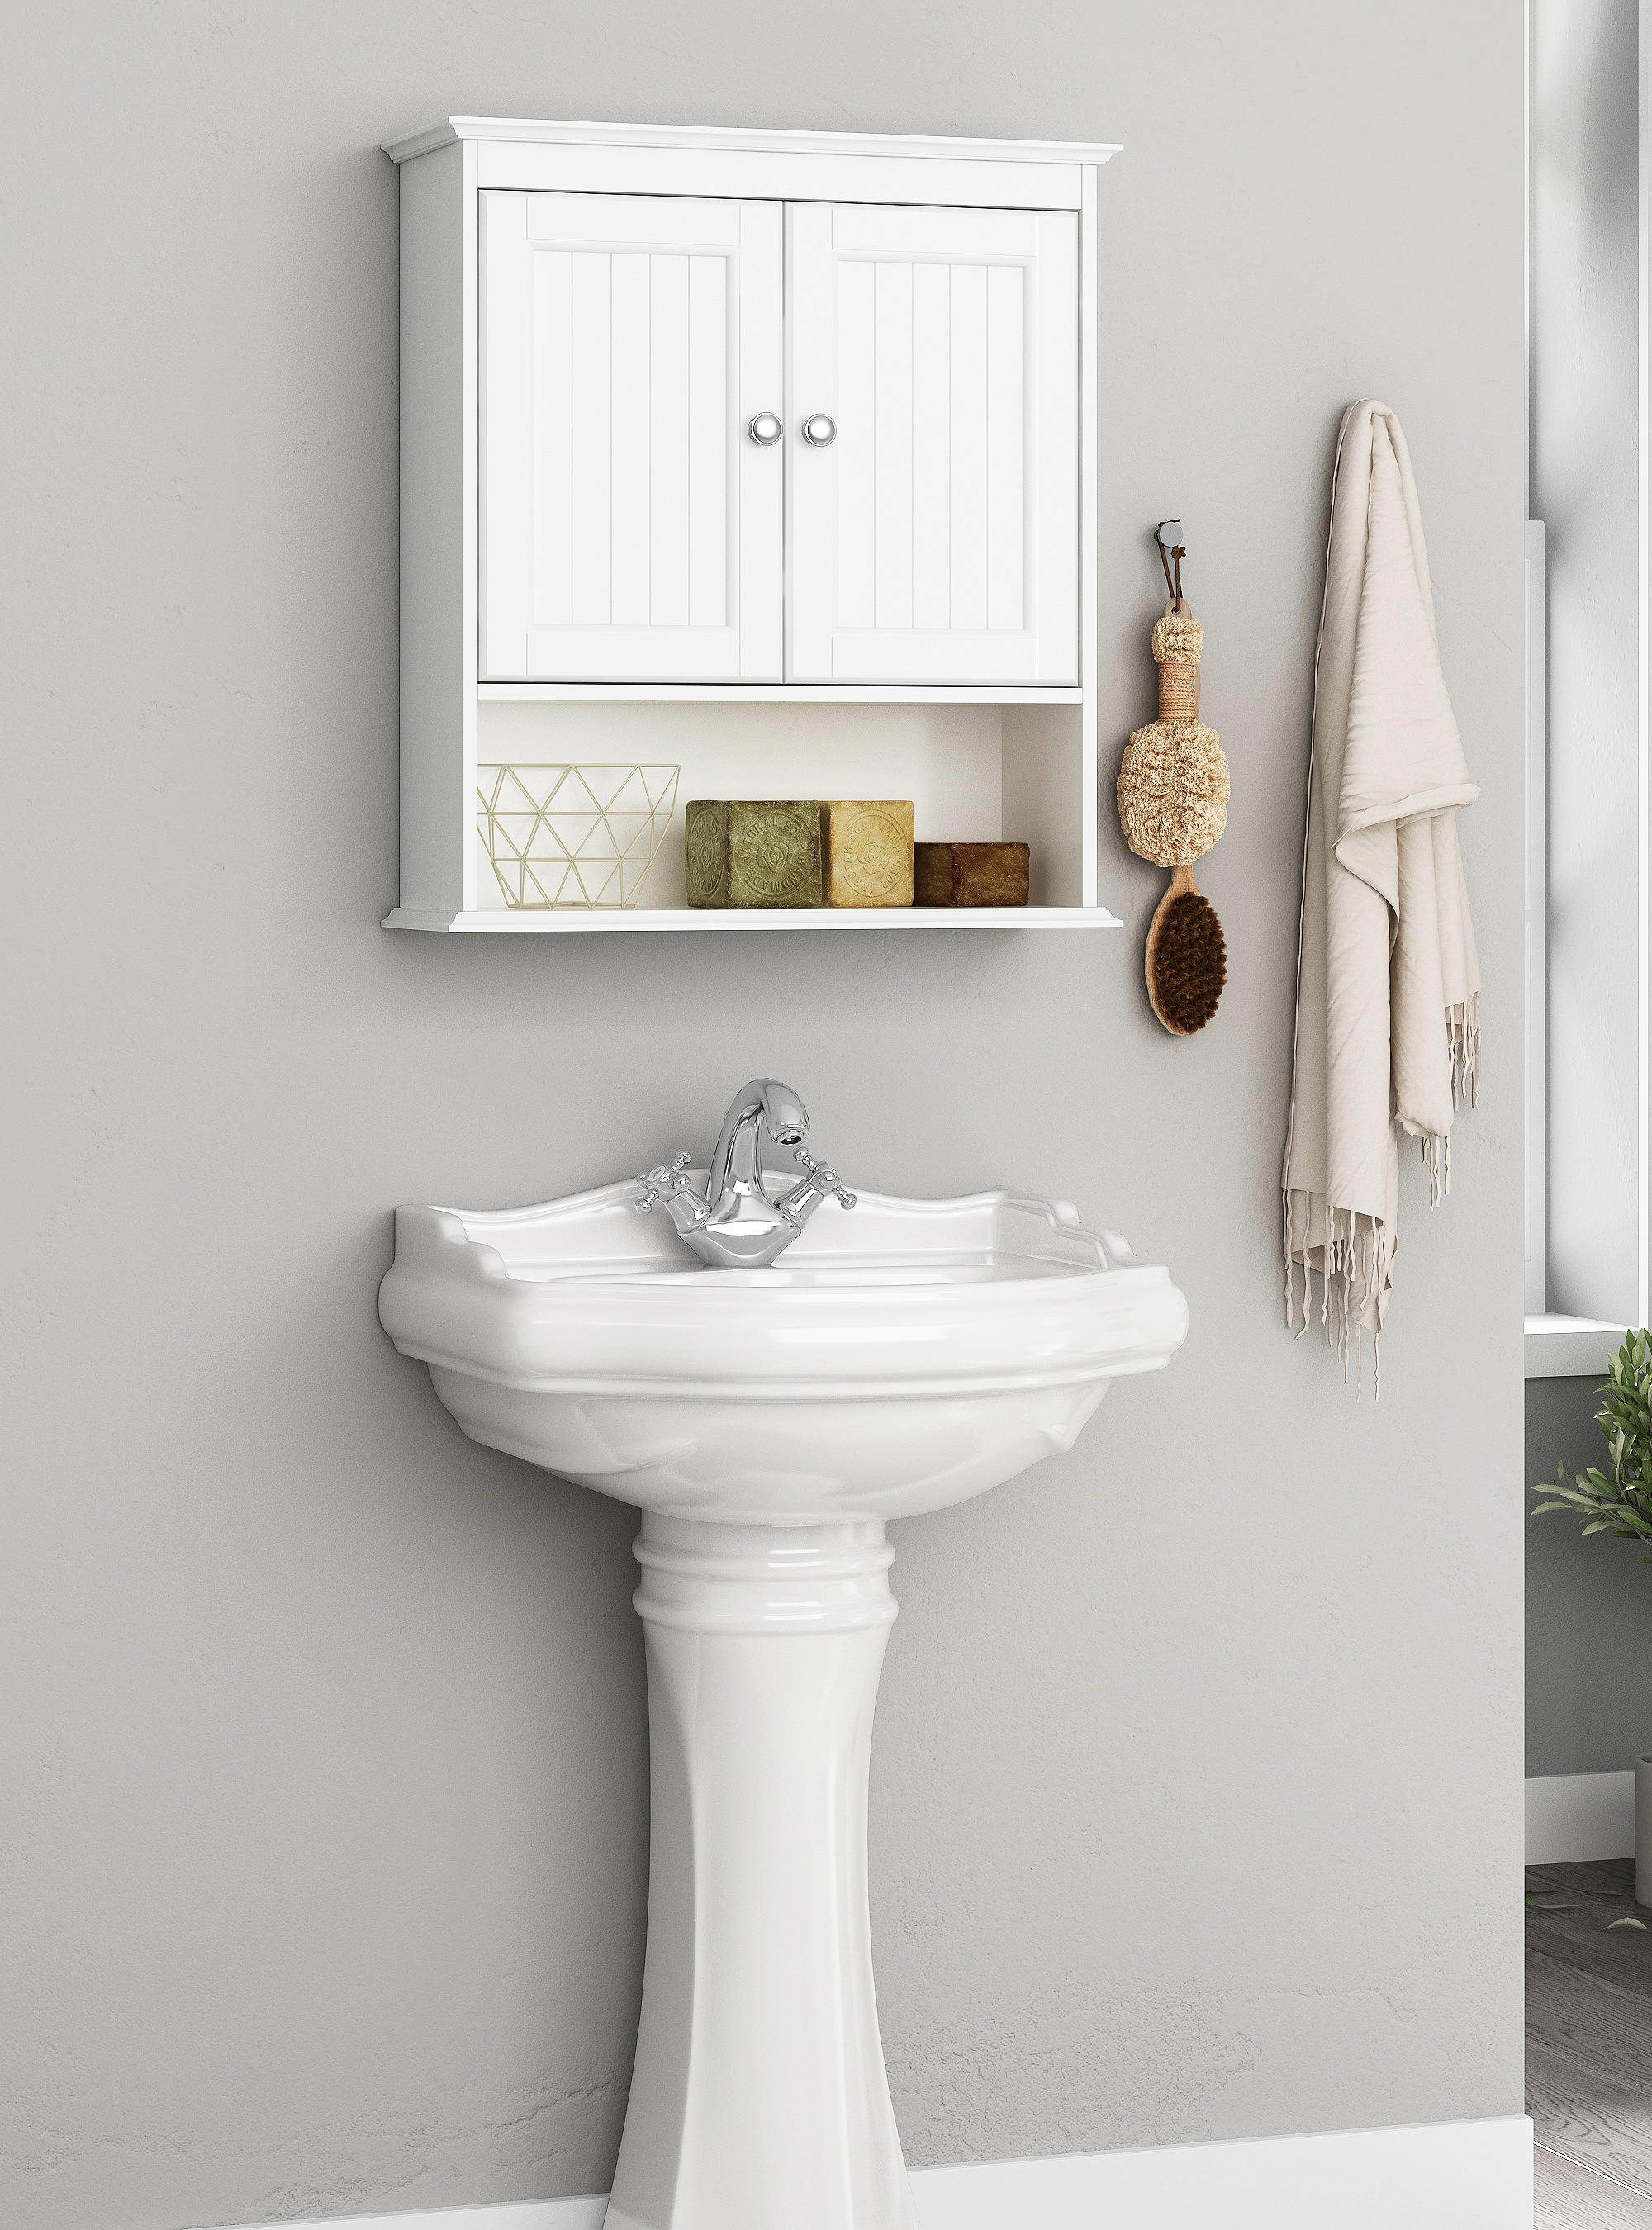 Spirich Home Bathroom Cabinet Wall Mounted with Doors, Wood Hanging Cabinet, Wall Cabinets with Doors and Shelves Over The Toilet, Bathroom Wall Cabinet White - image 2 of 6